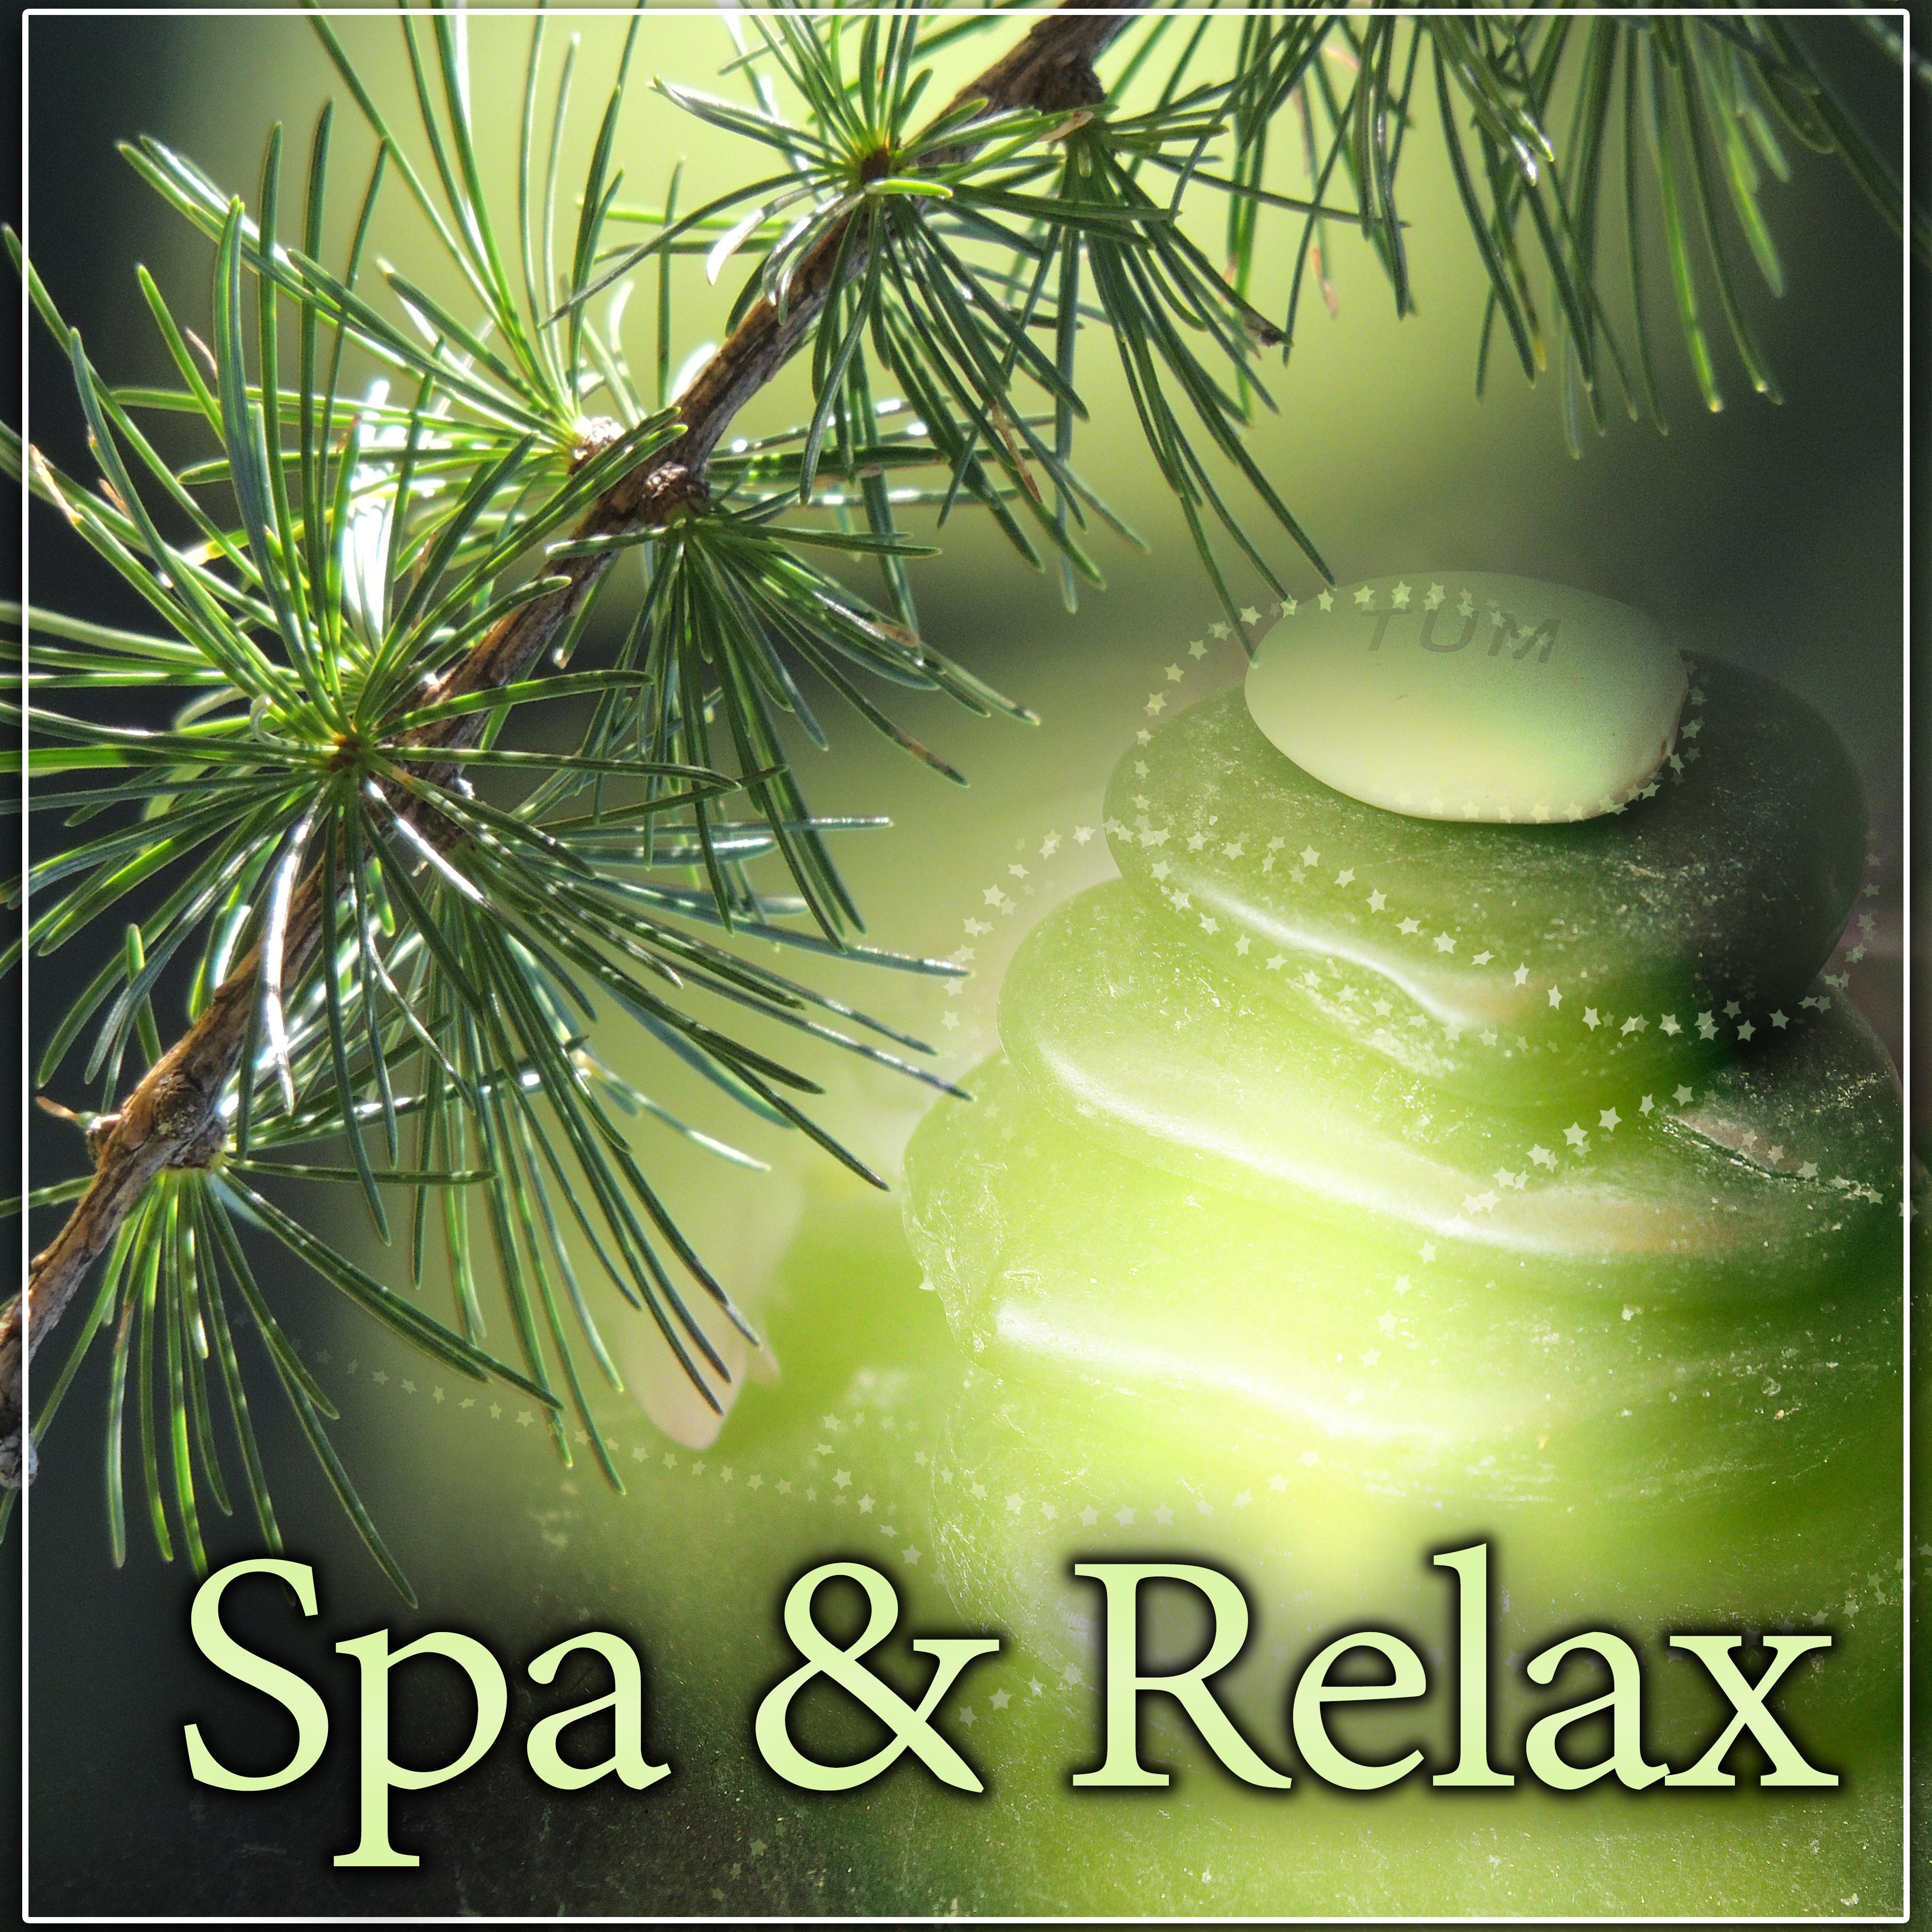 Spa & Relax - Gentle Music for SPA & Beauty, Relax Time, Deep Sleep, Sensuality Sounds to Wellness